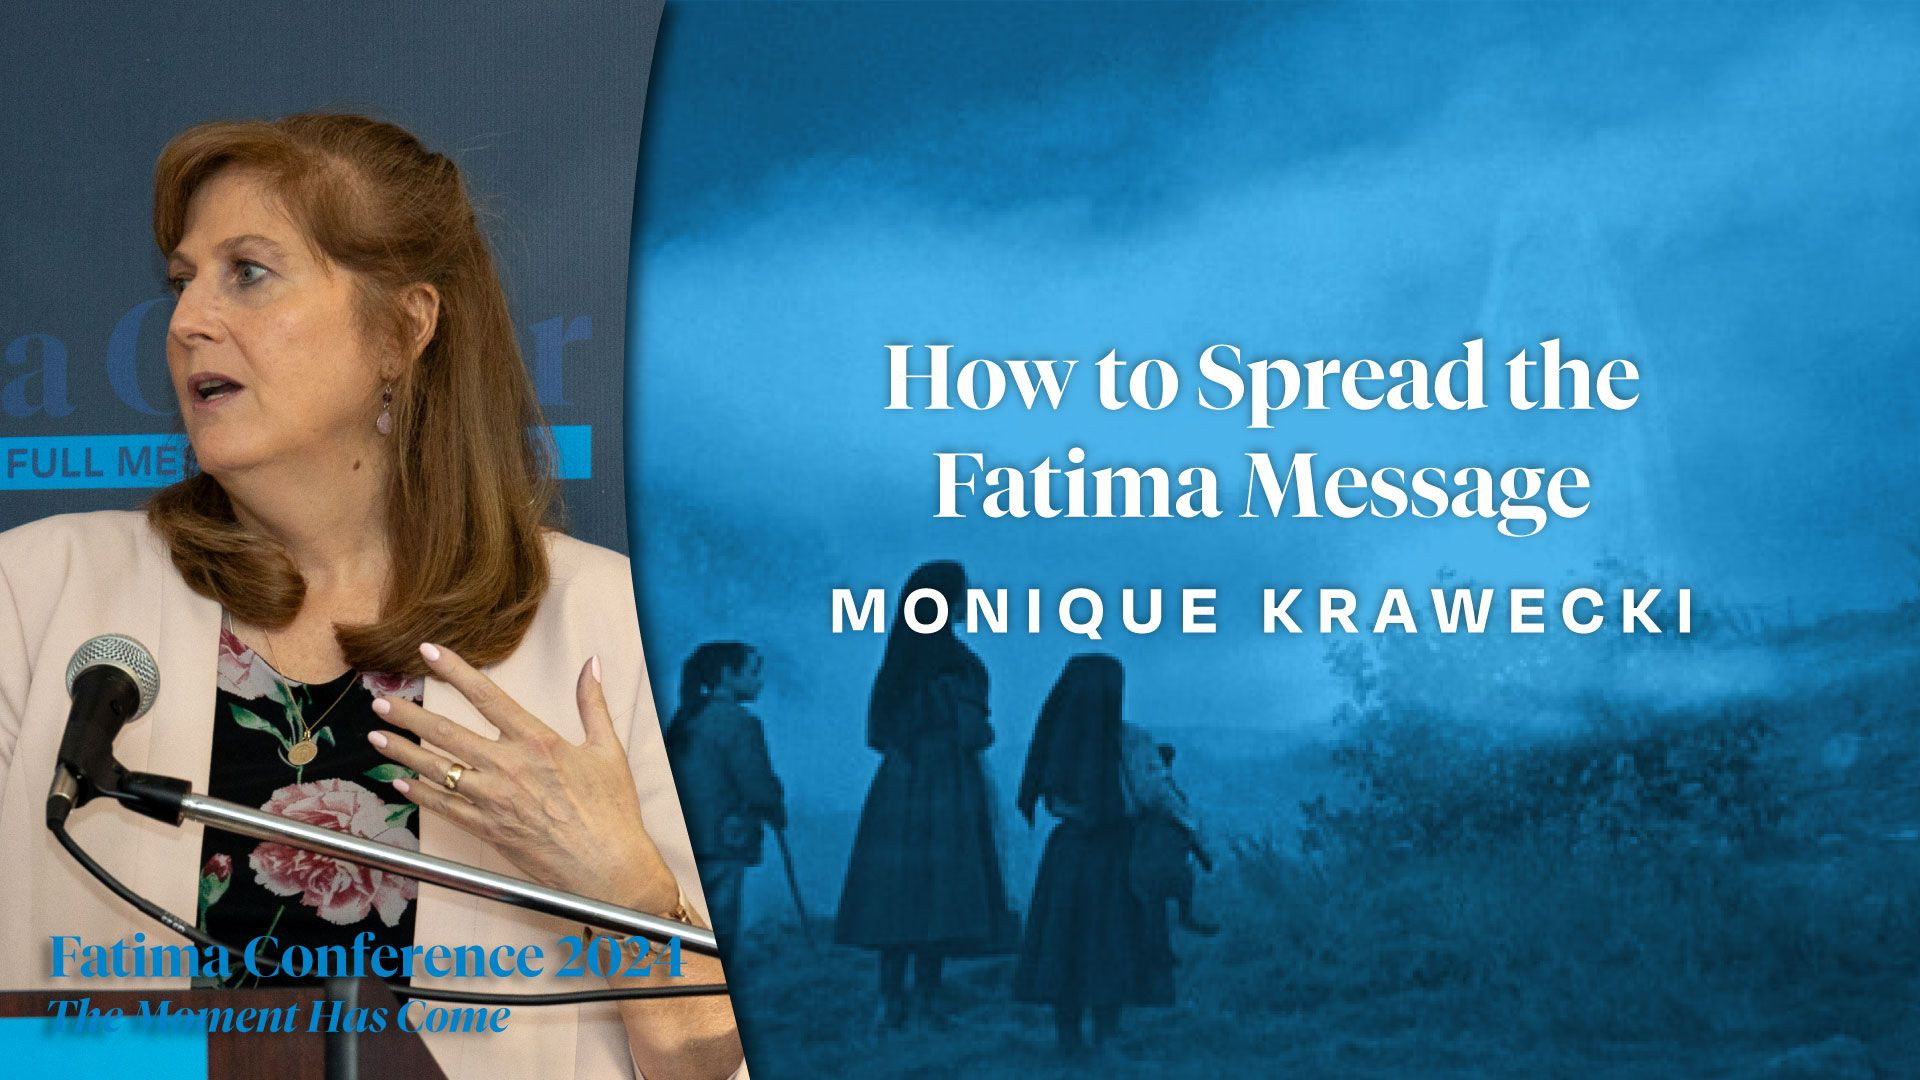 Why and How to Spread the Fatima Message by Monique Krawecki | FC24 Dallas, TX